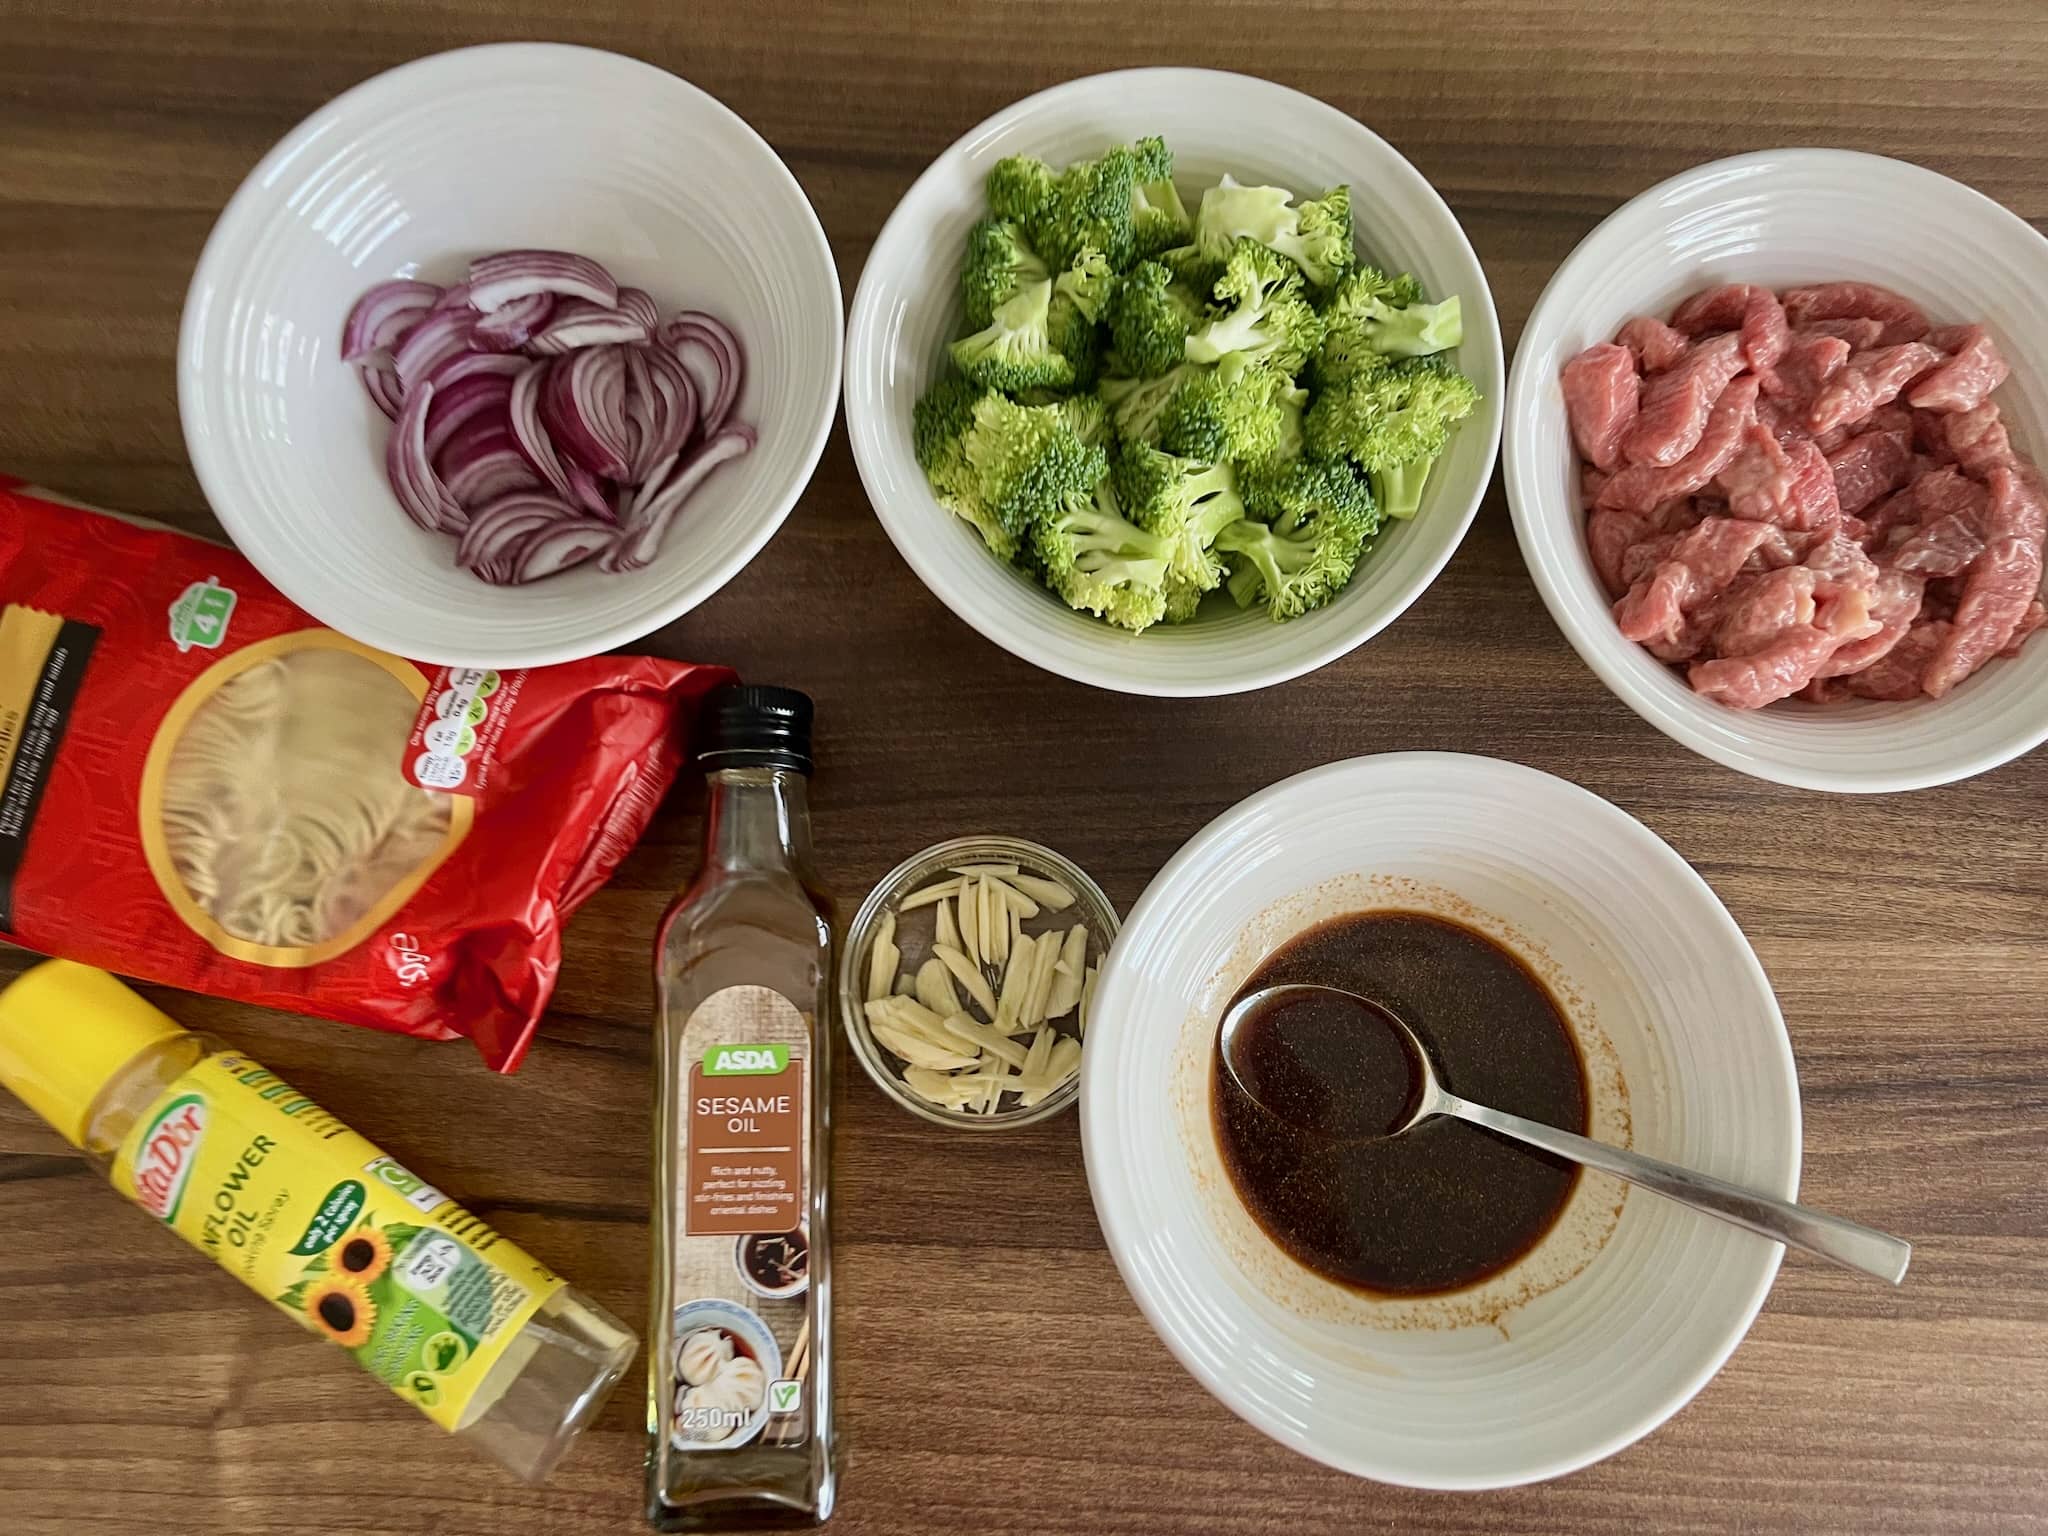 All the ingredients on the tabletop ready to make Beef Steak Stir Fry Noodles